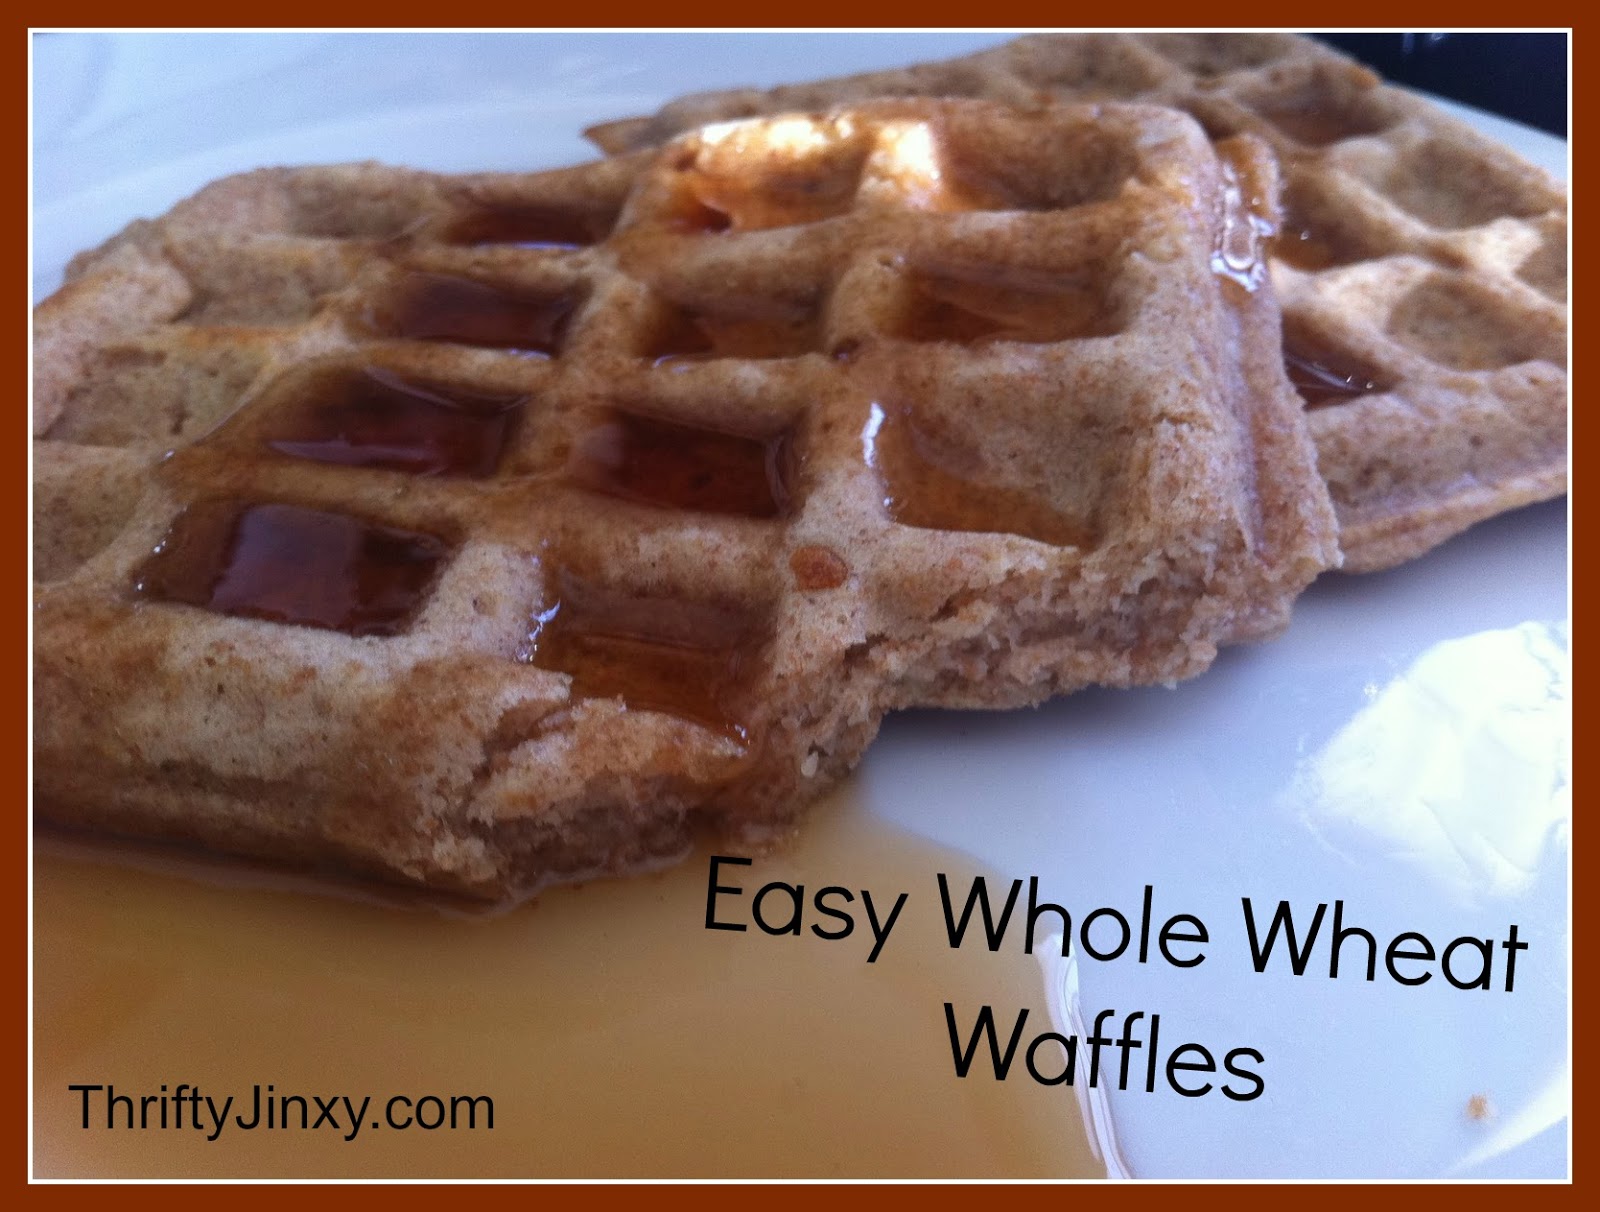 Image of whole wheat waffles made with a blender